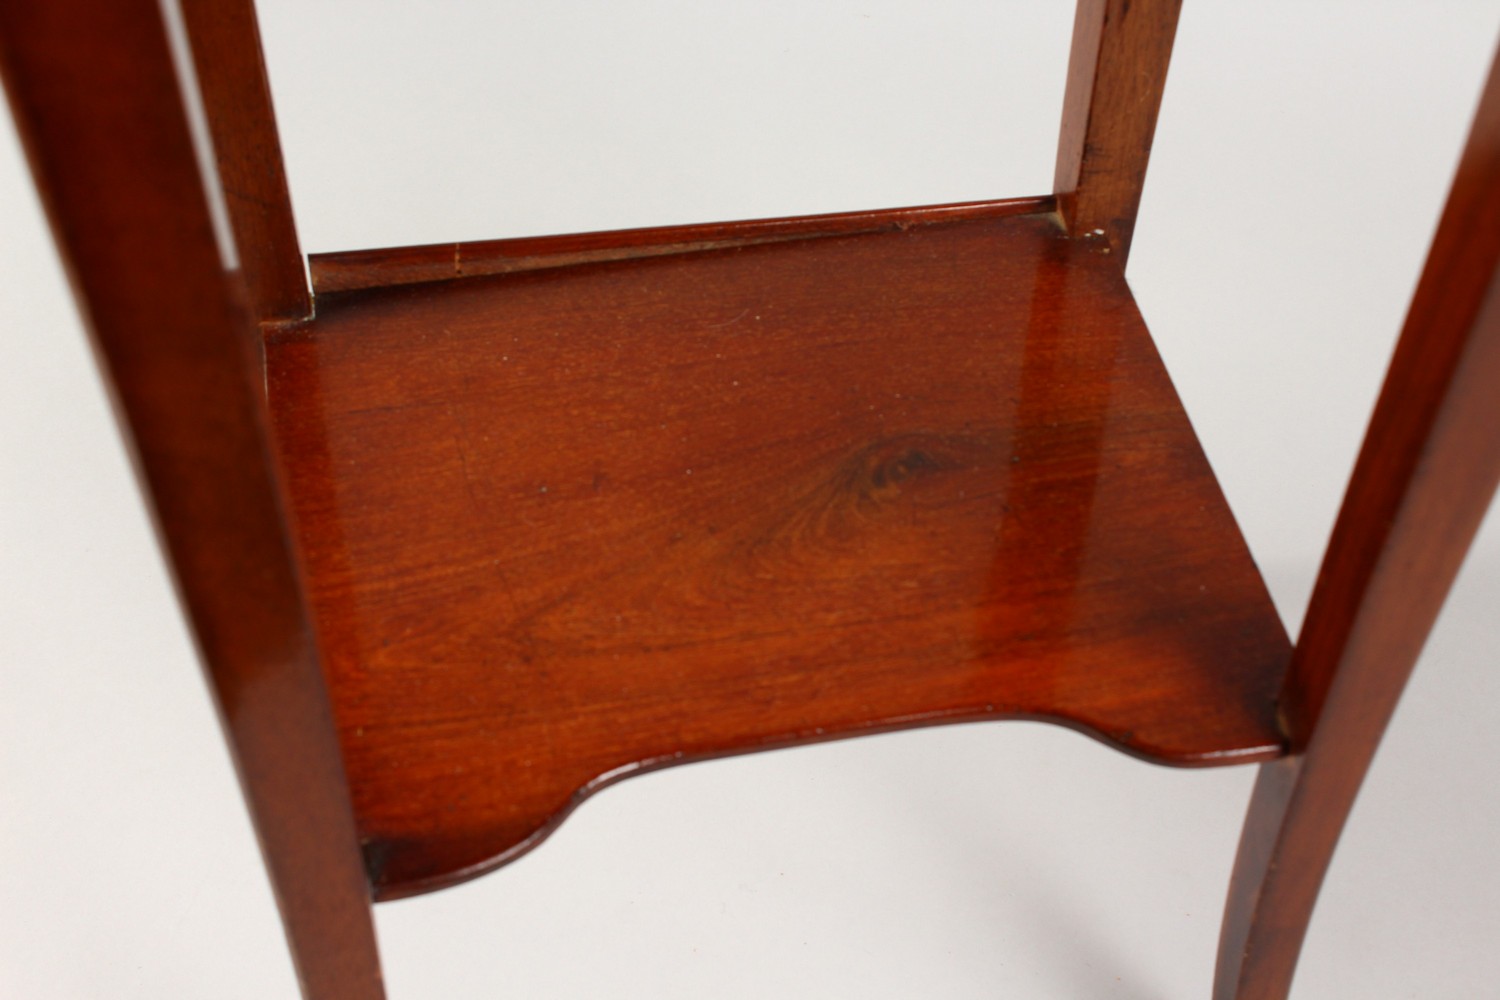 A LATE 19TH CENTURY FRENCH MAHOGANY MARBLE TOP TWO DRAWER PETIT COMMODE, the slender legs united - Image 6 of 6